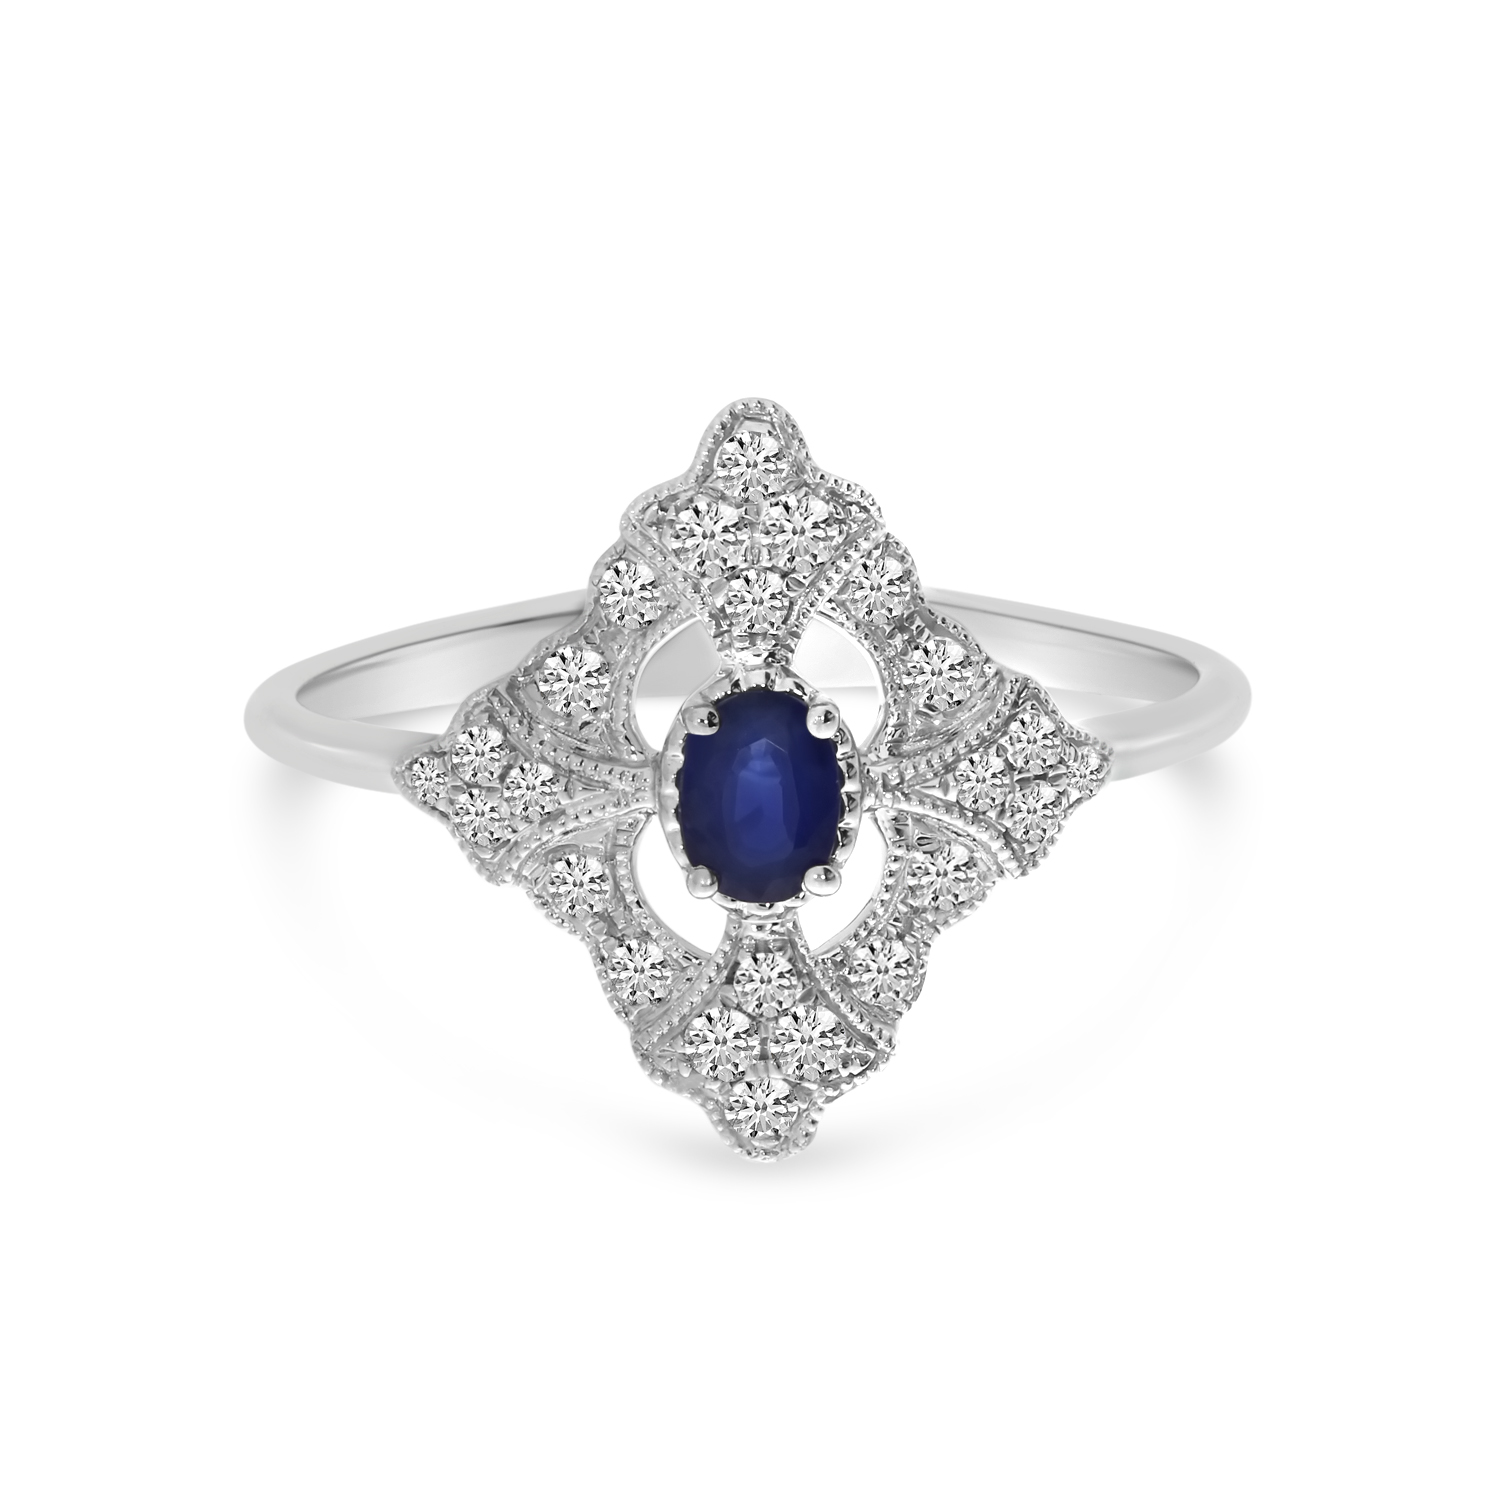 14K White Gold Oval Sapphire and Diamond Art Deco Ring